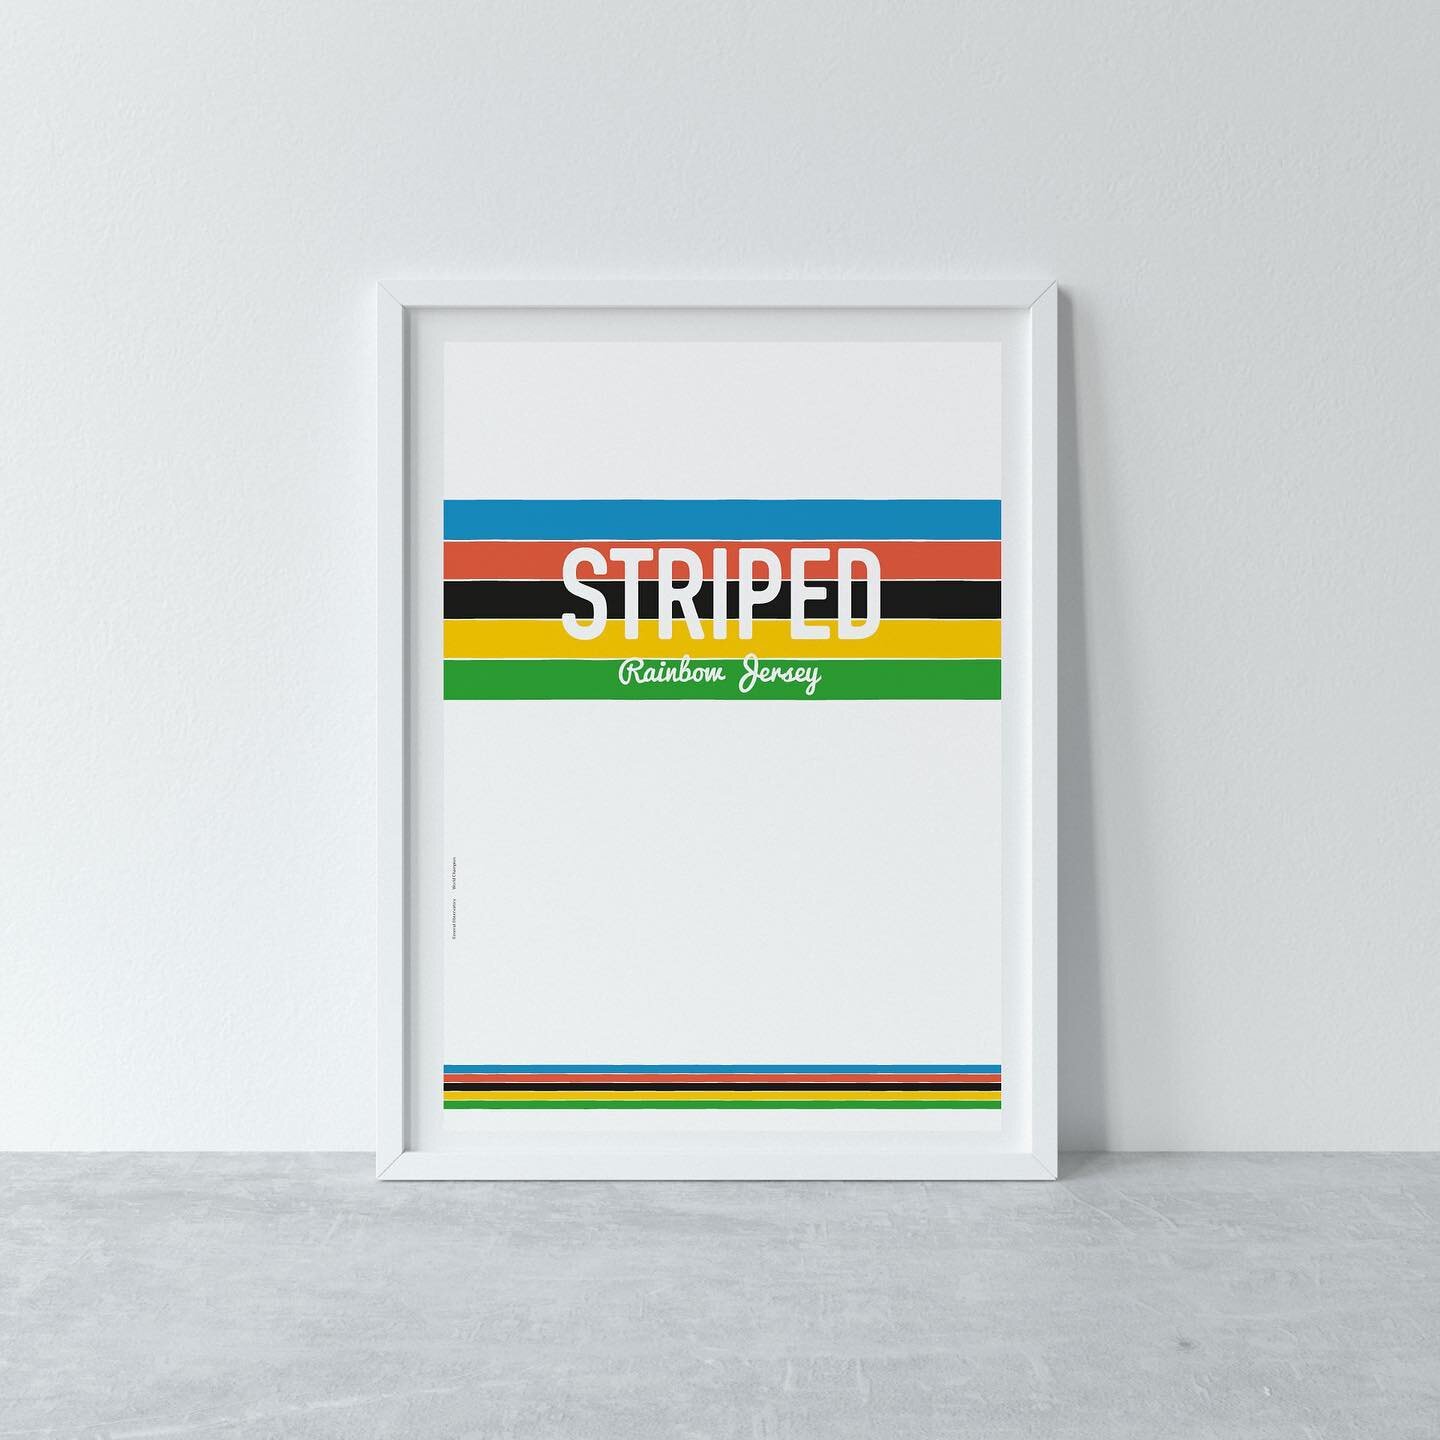 The Rainbow shirt is worn by the reigning world champion. Love a striped shirt! This is the final graphic interpretation of cycling shirts. With one to follow celebrating a missed legend of the cycling world. 
.
.
.
.
.
.
.
.
#cyclinglife #cyclingart